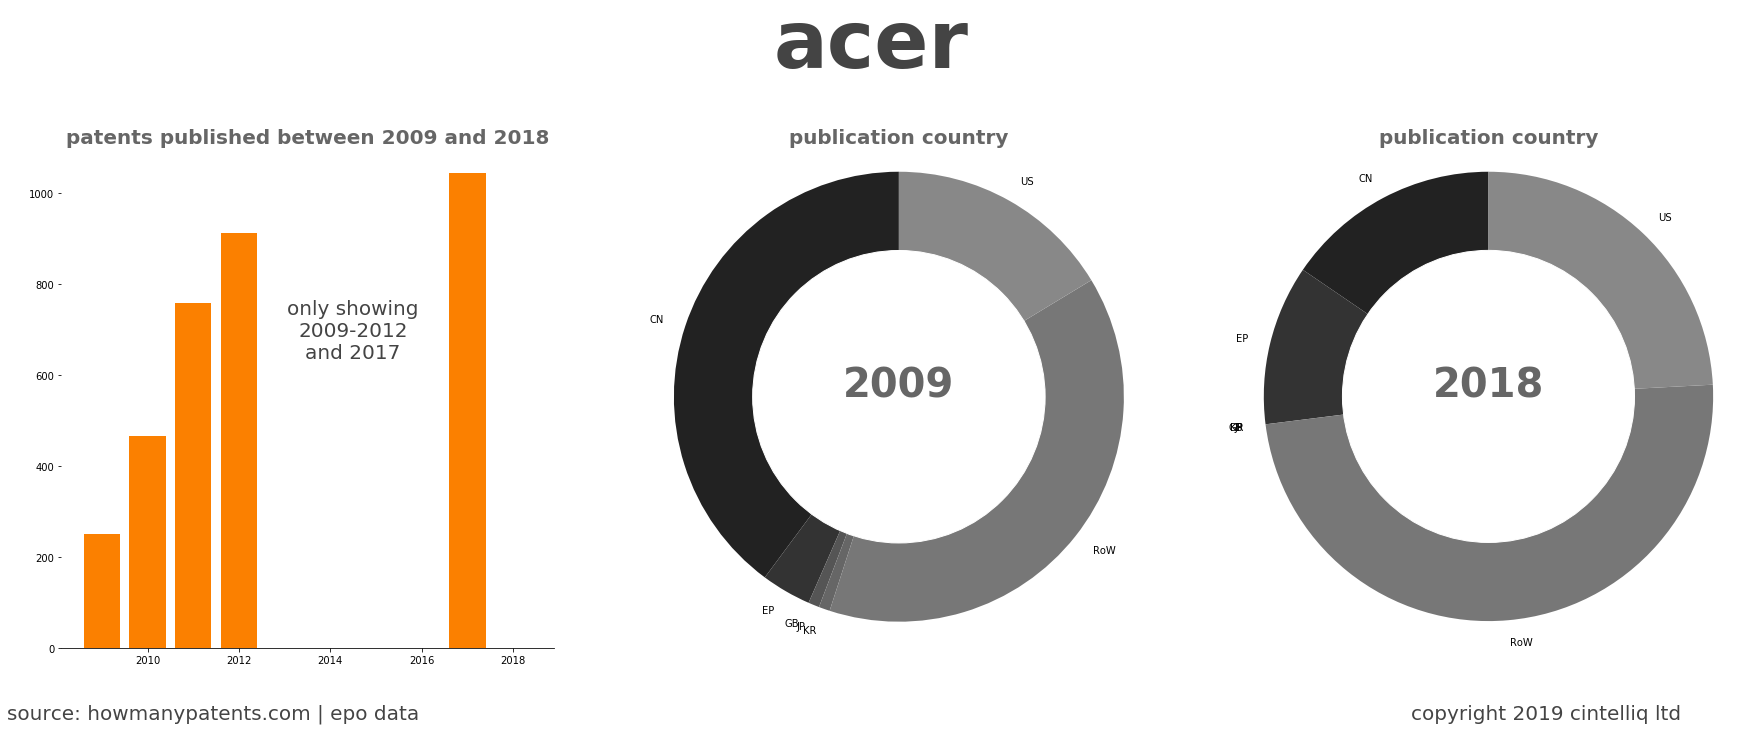 summary of patents for Acer